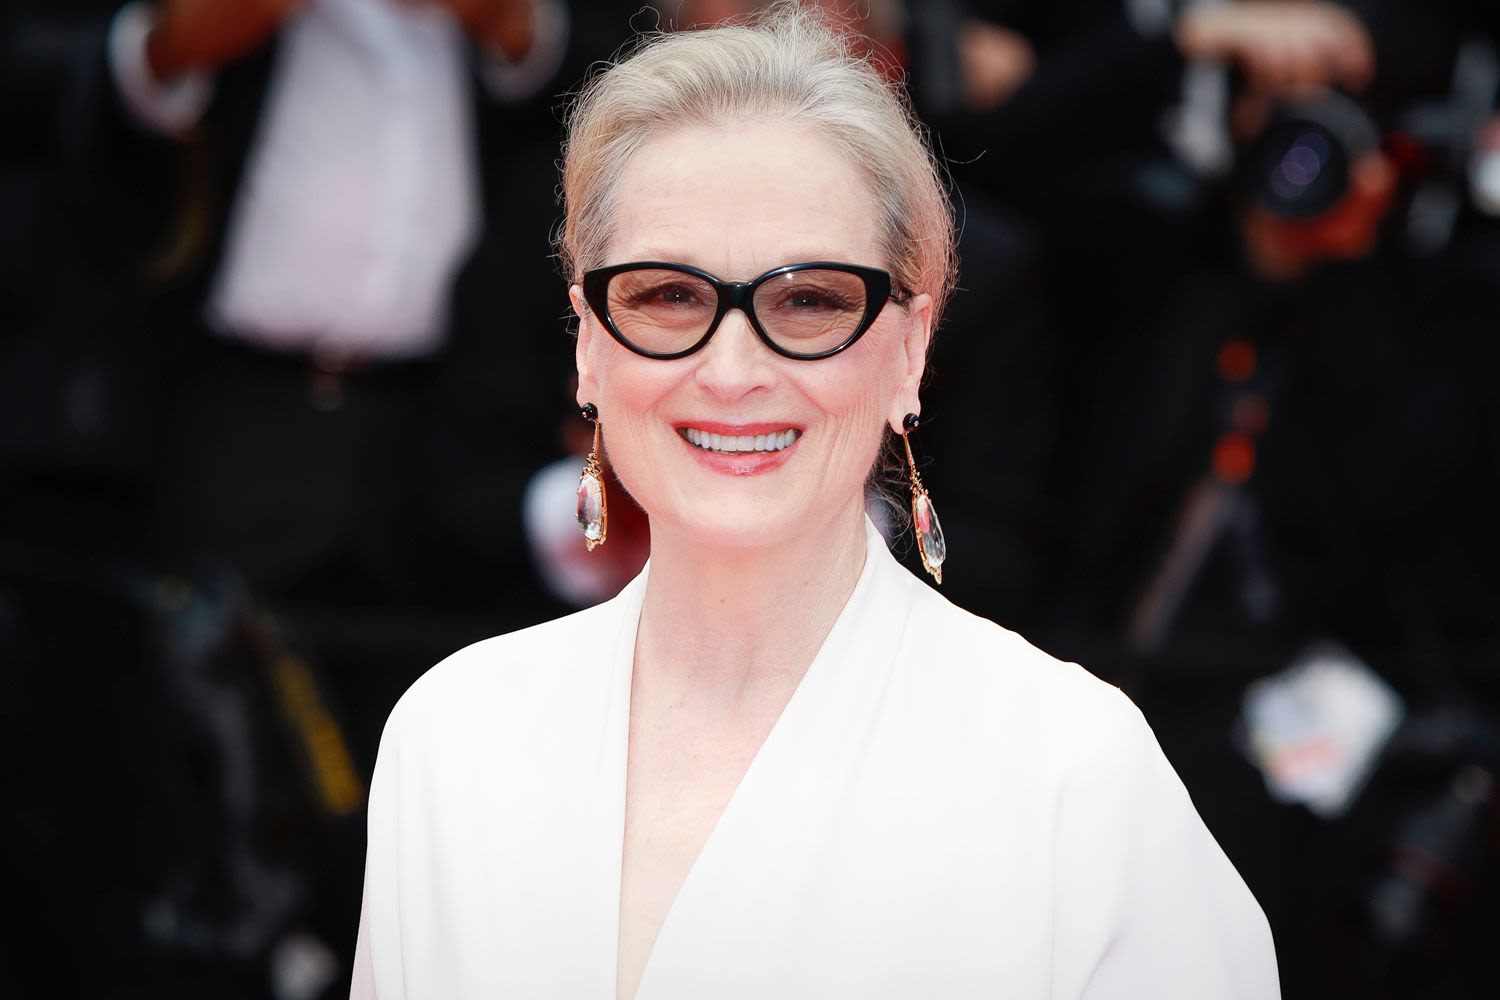 Meryl Streep Turns 75: Inside Her 'Crowded Life' as a Mother, Grandmother and Oscar-Winning Actress